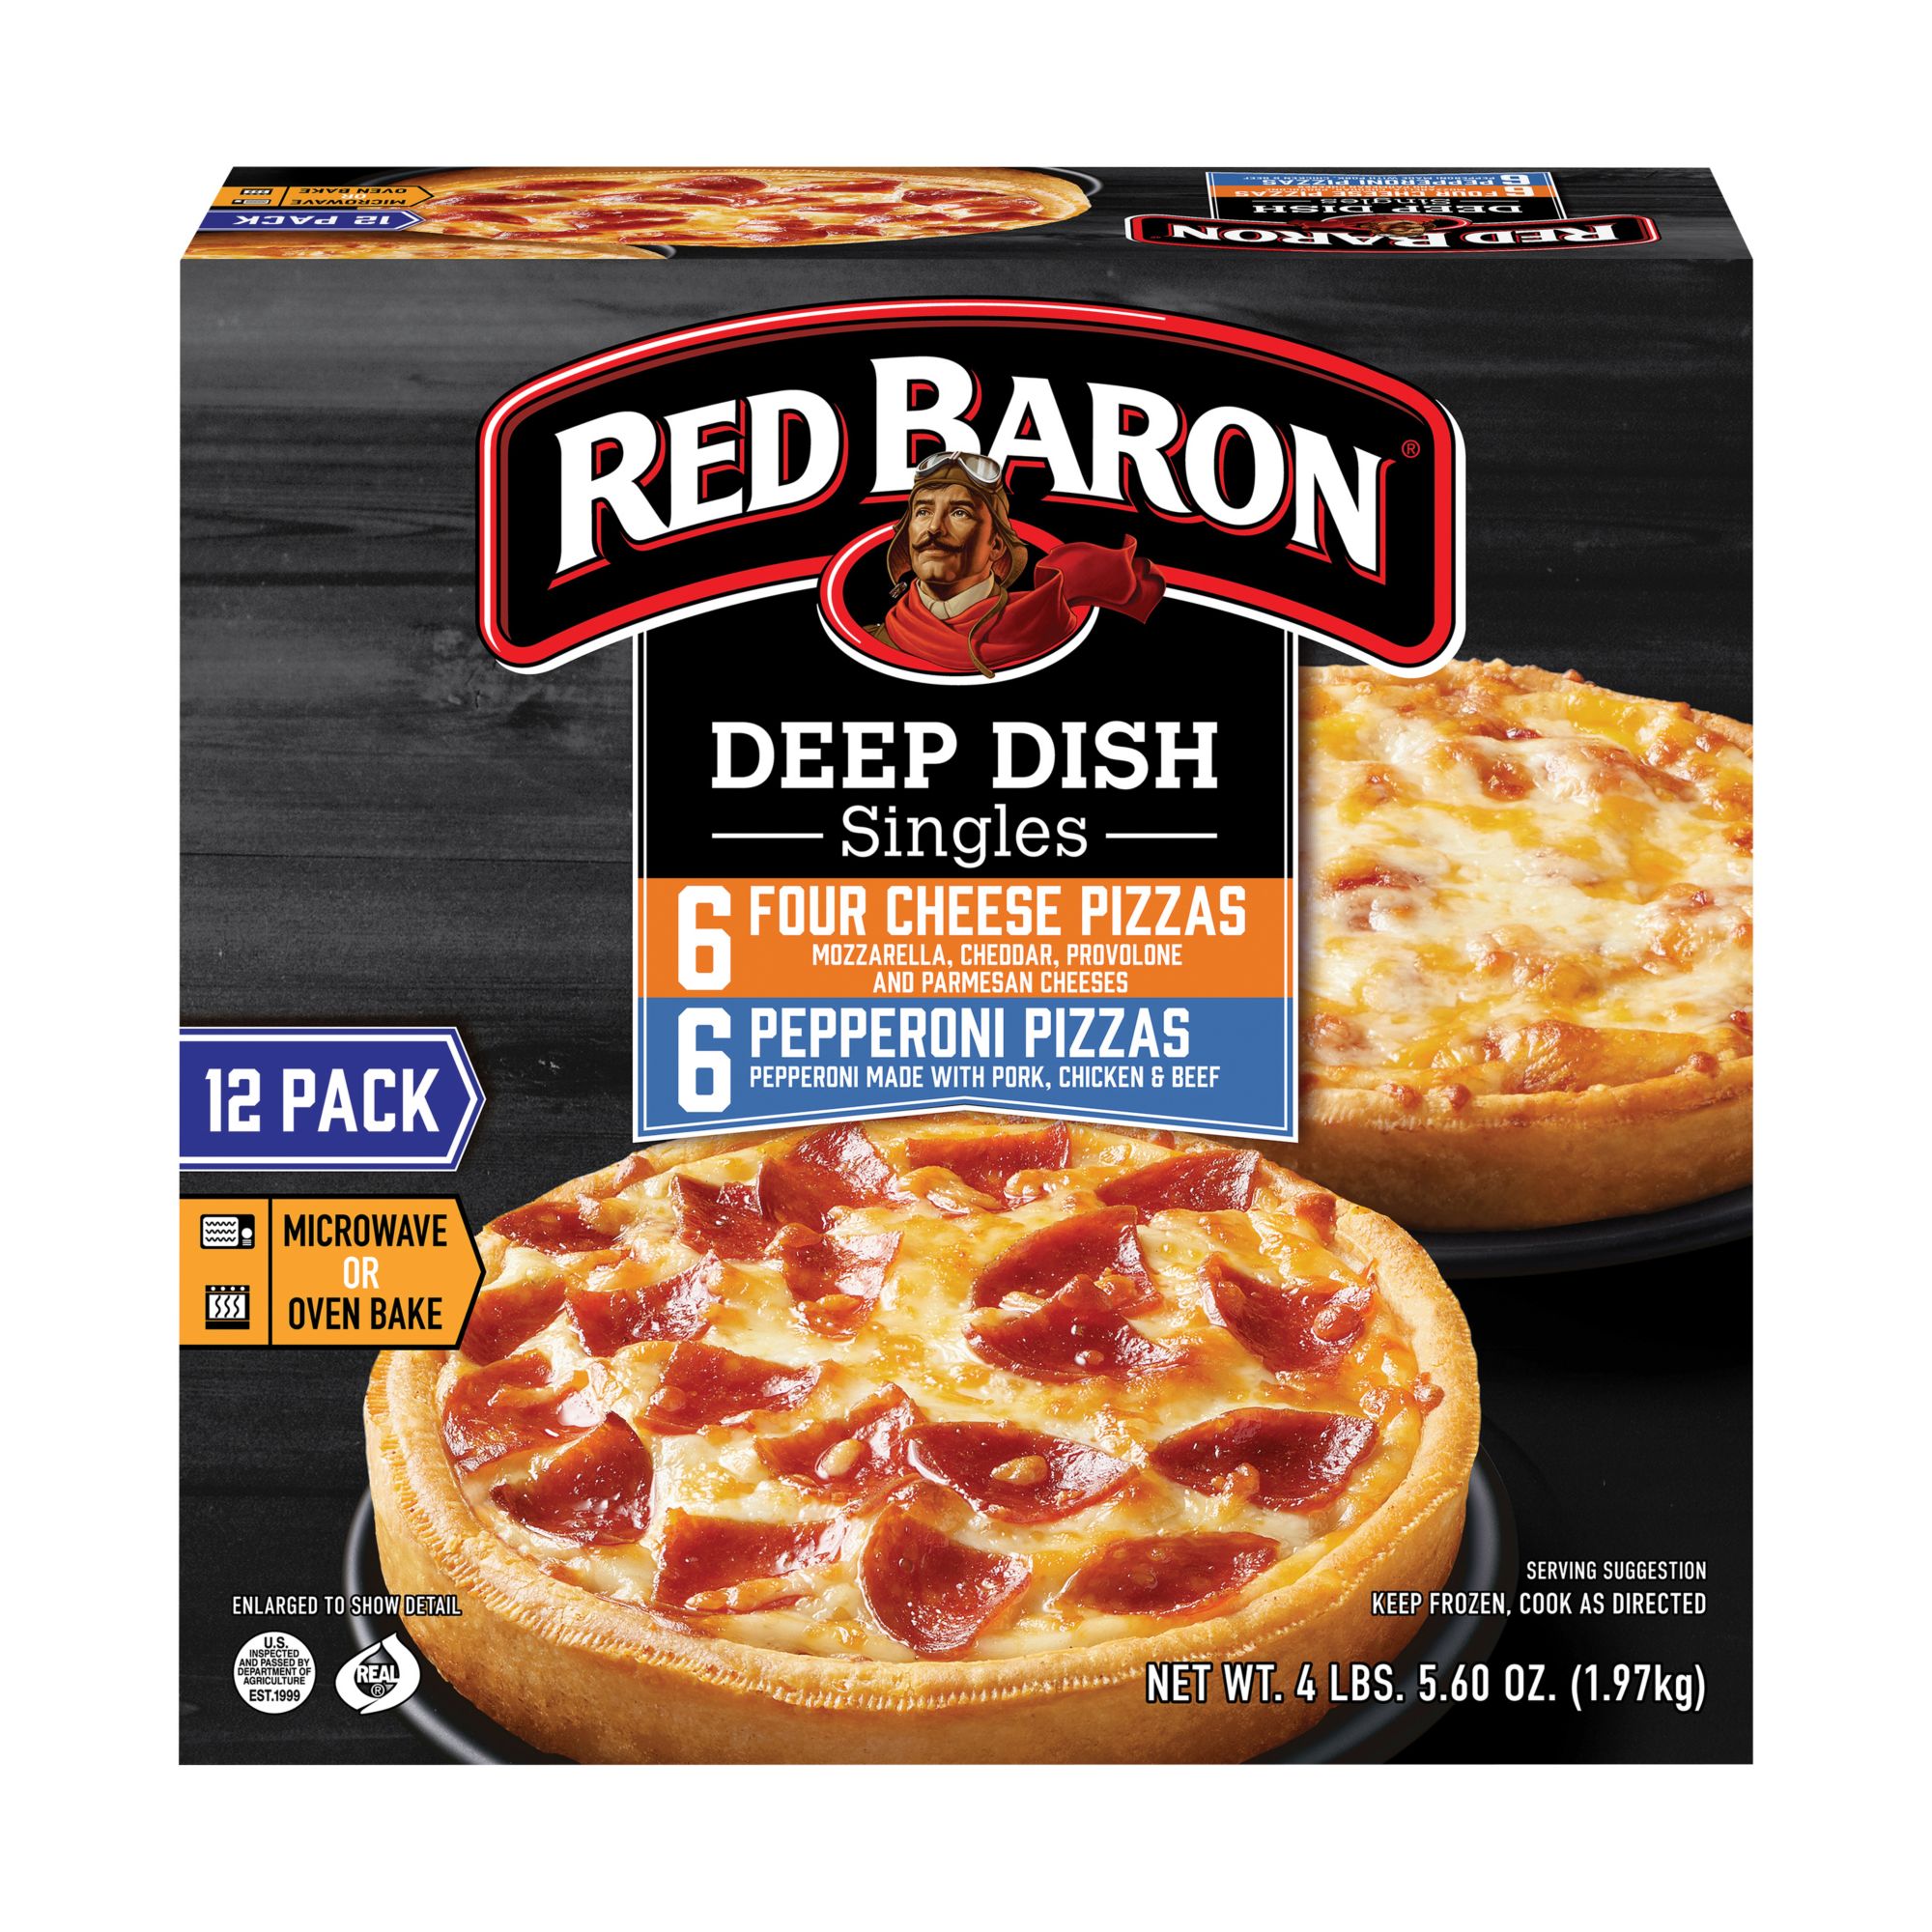 Red Baron Deep Dish Pizza Singles, Pepperoni and Four Cheese Variety Pack, 12 ct.